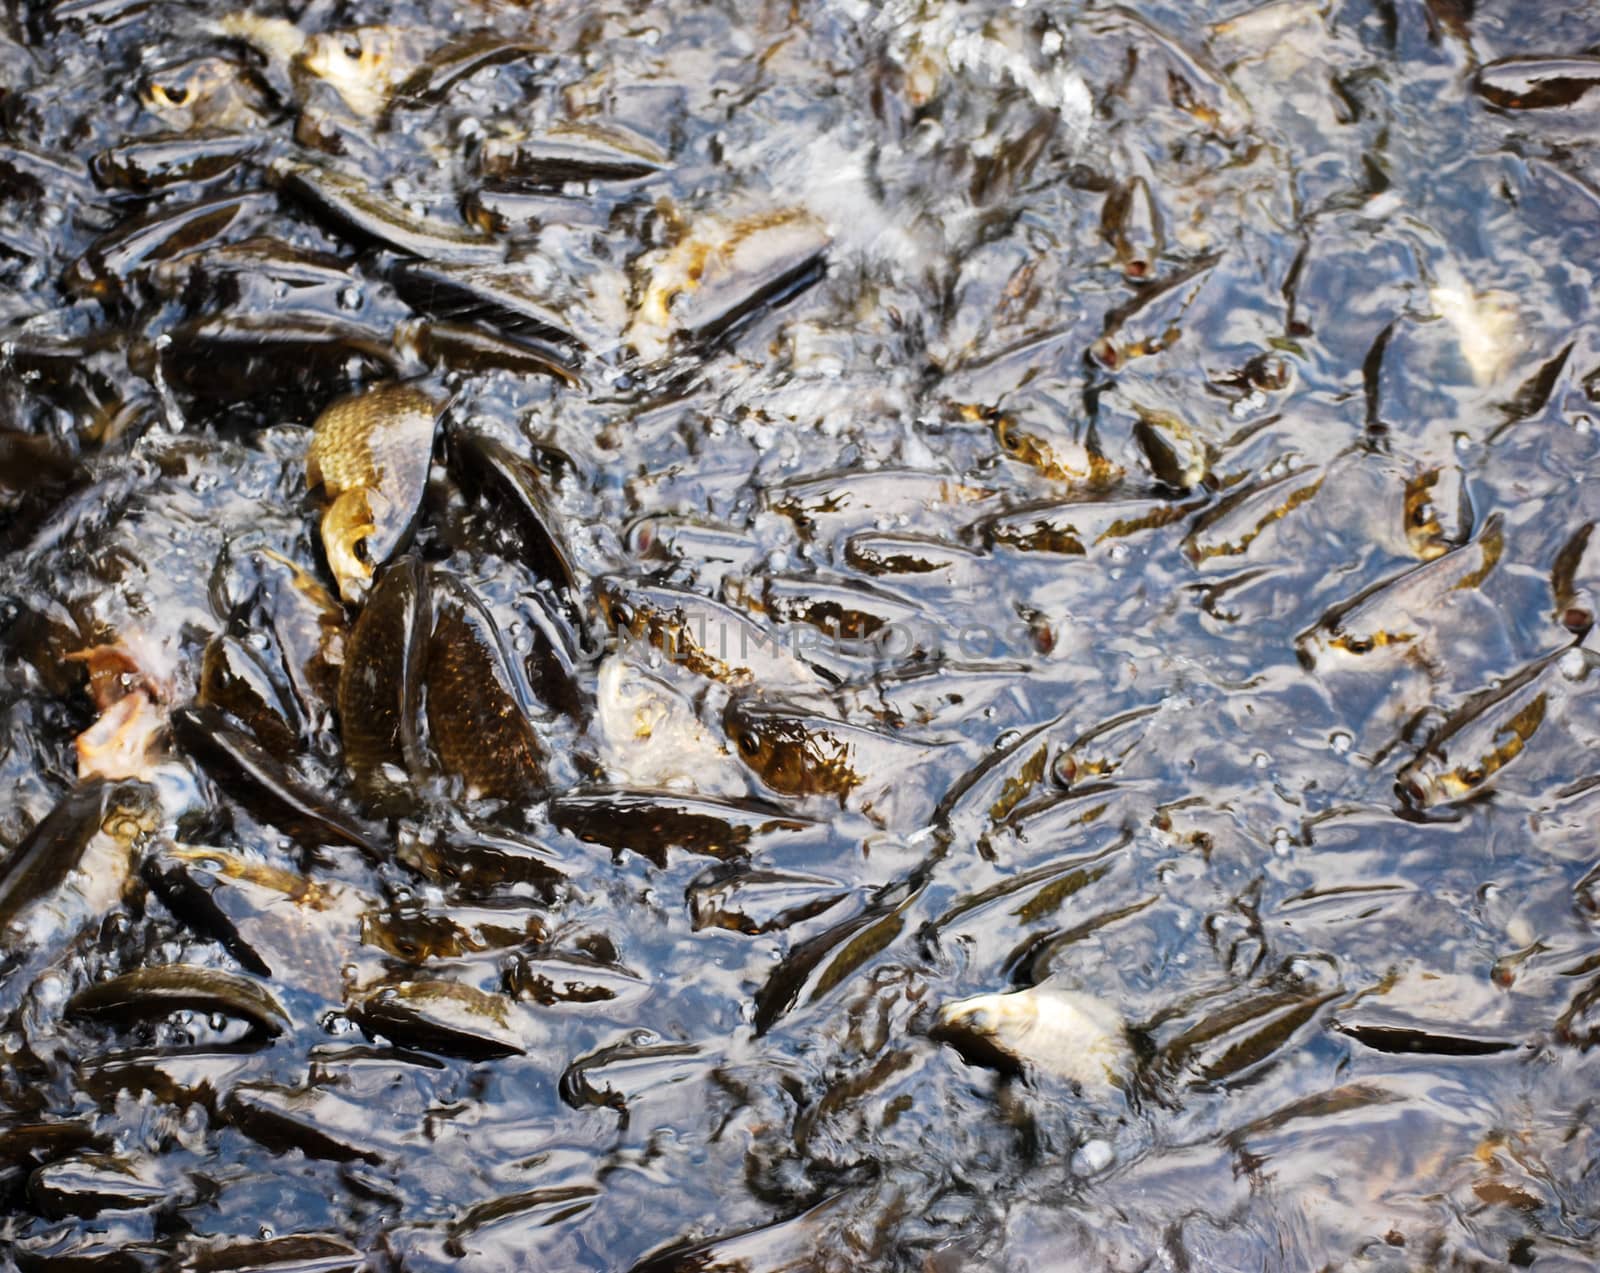 swarm of fish near the water surface